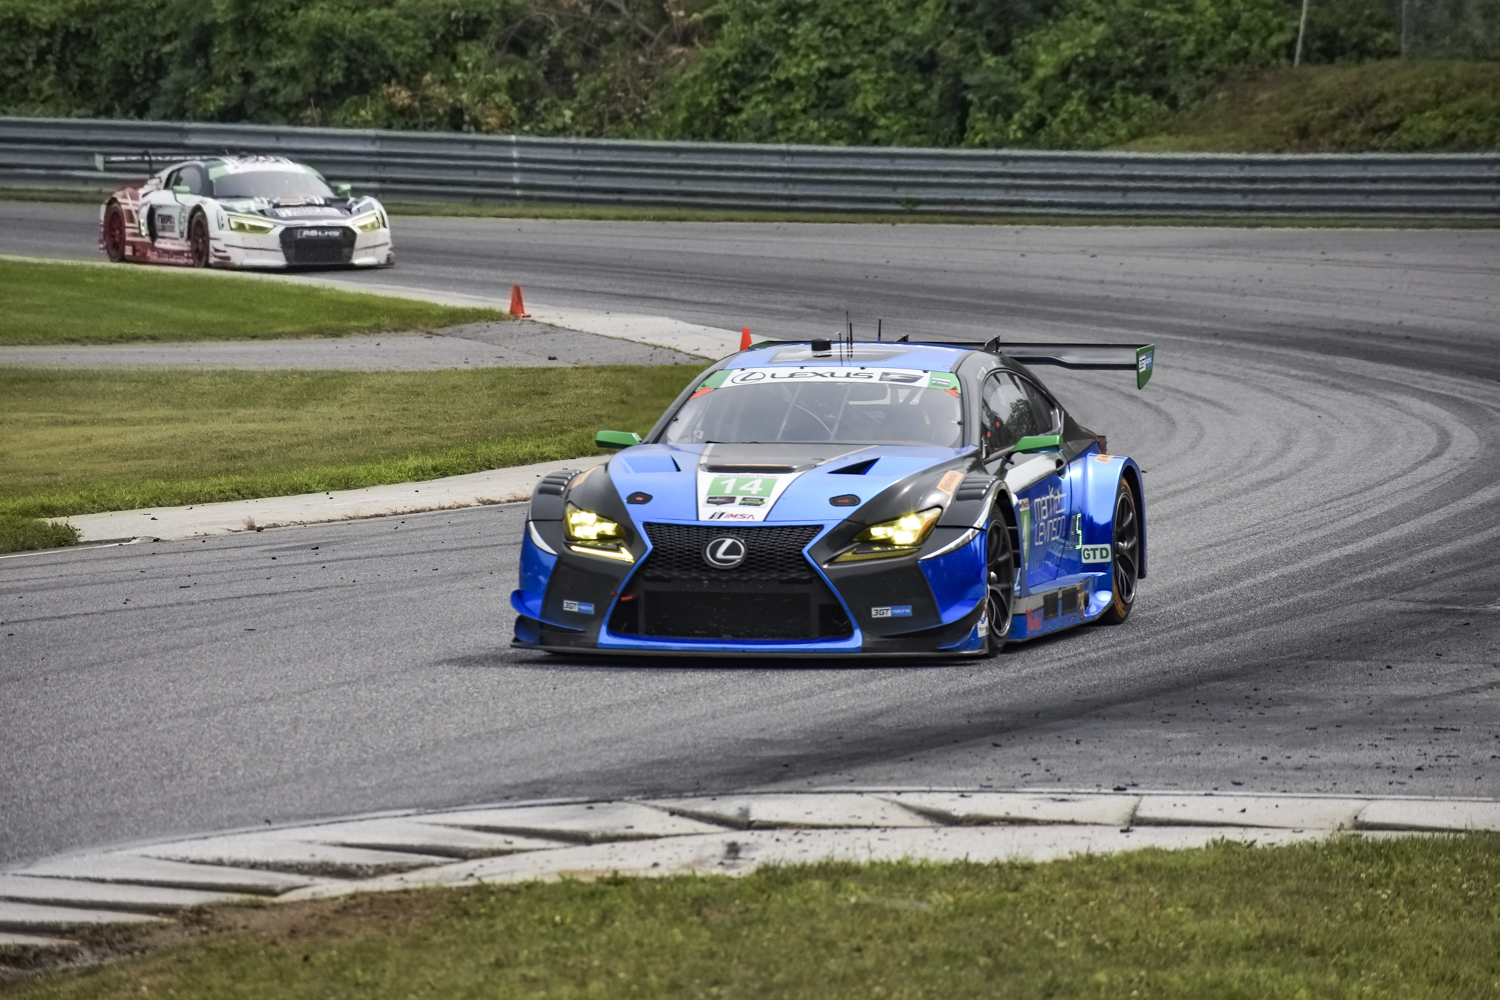 Shot of the Lexus RC F GT3 turning a corner ahead of another car